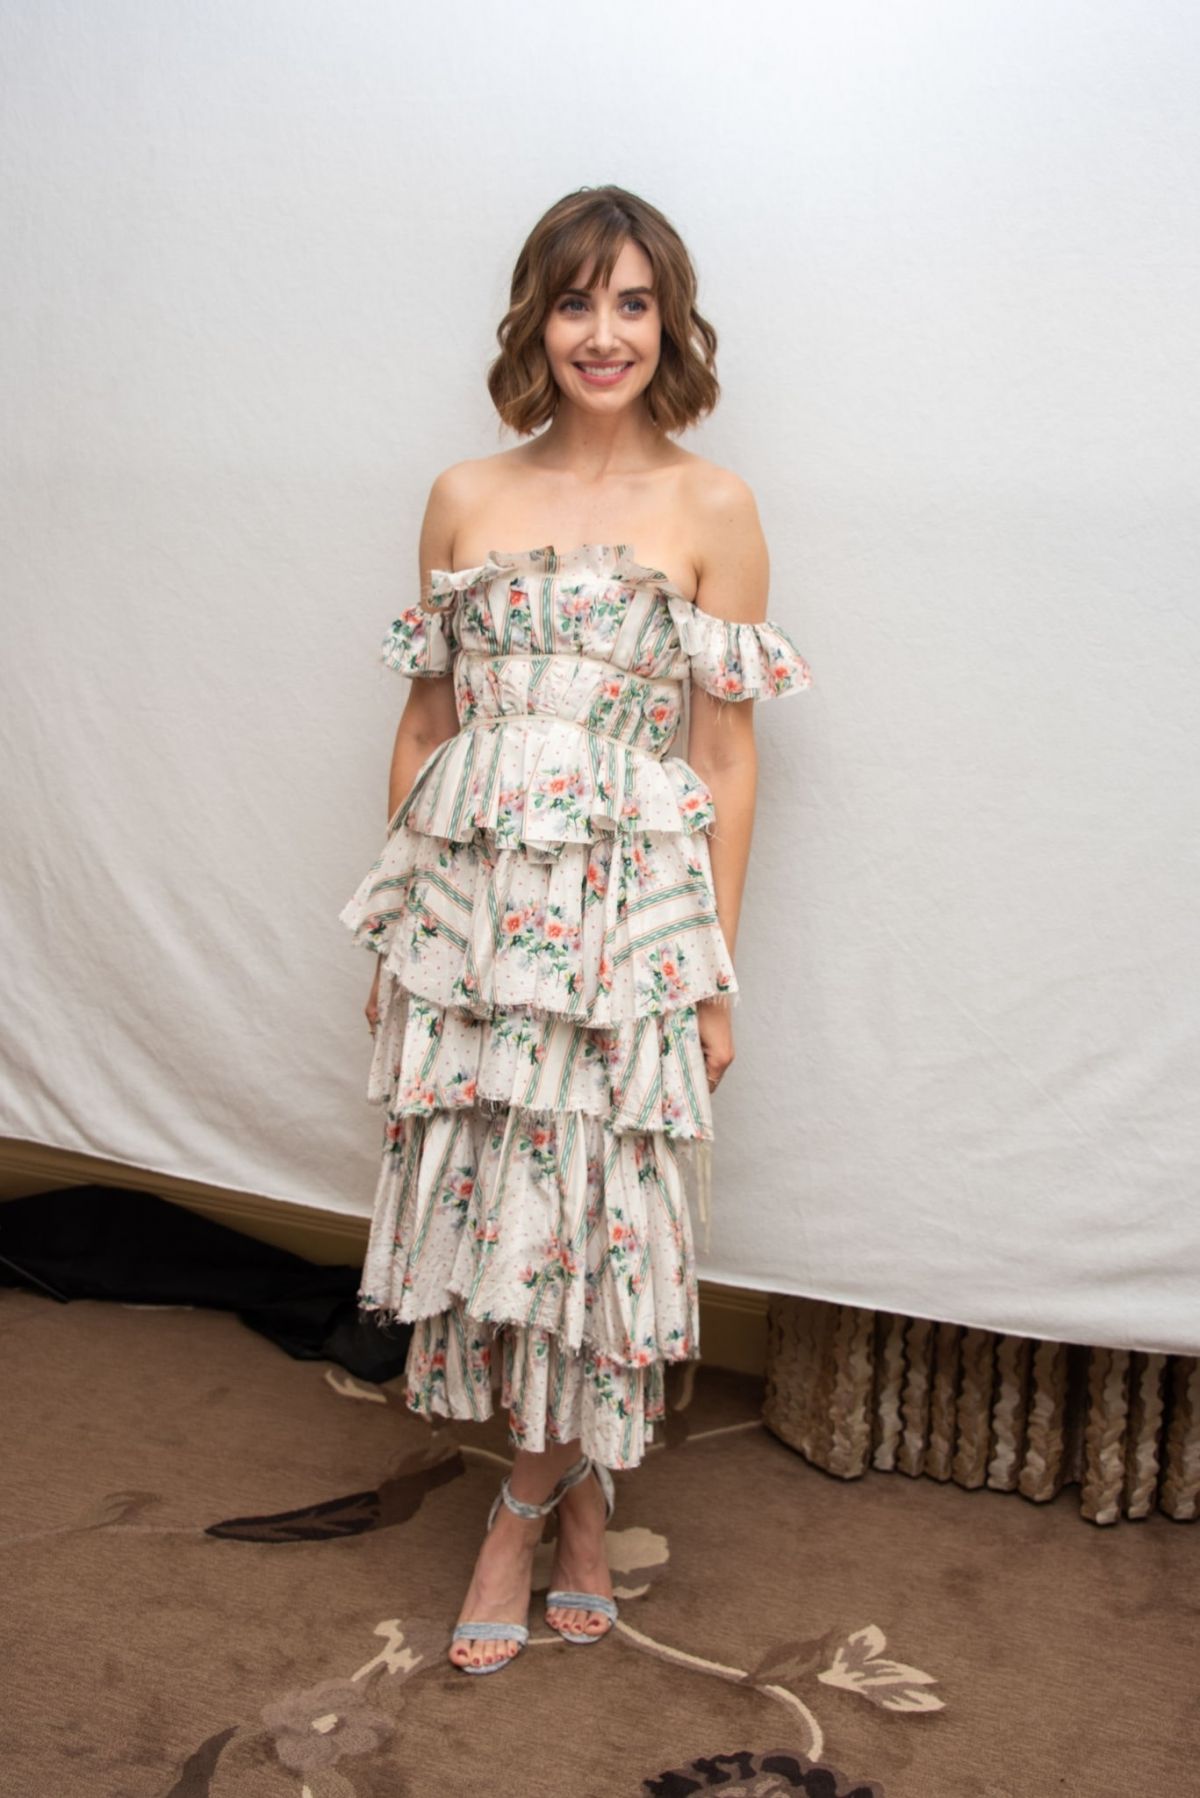 alison-brie-in-brock-collection-@-glow’-press-conference